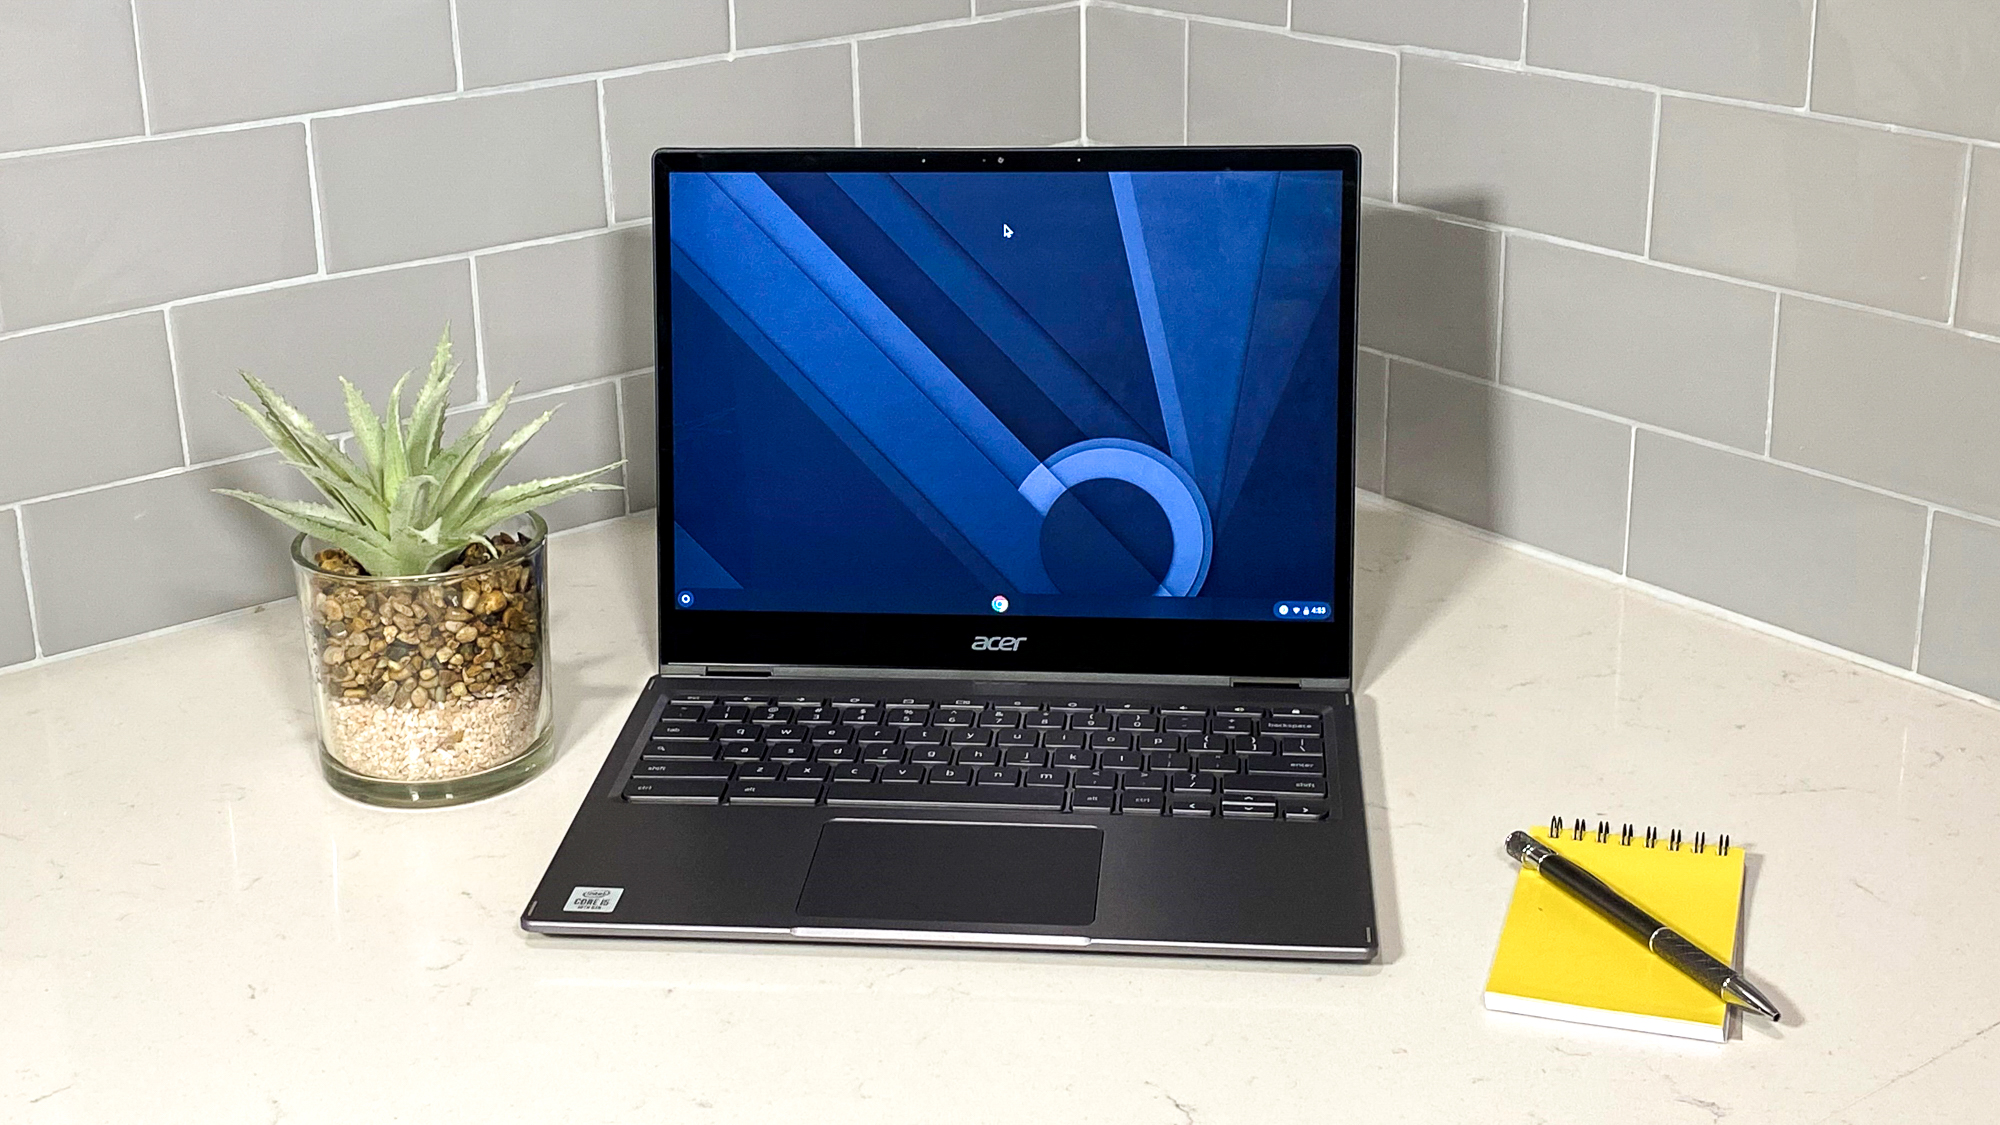 Acer Chromebook Spin 713 review: It's all about the display